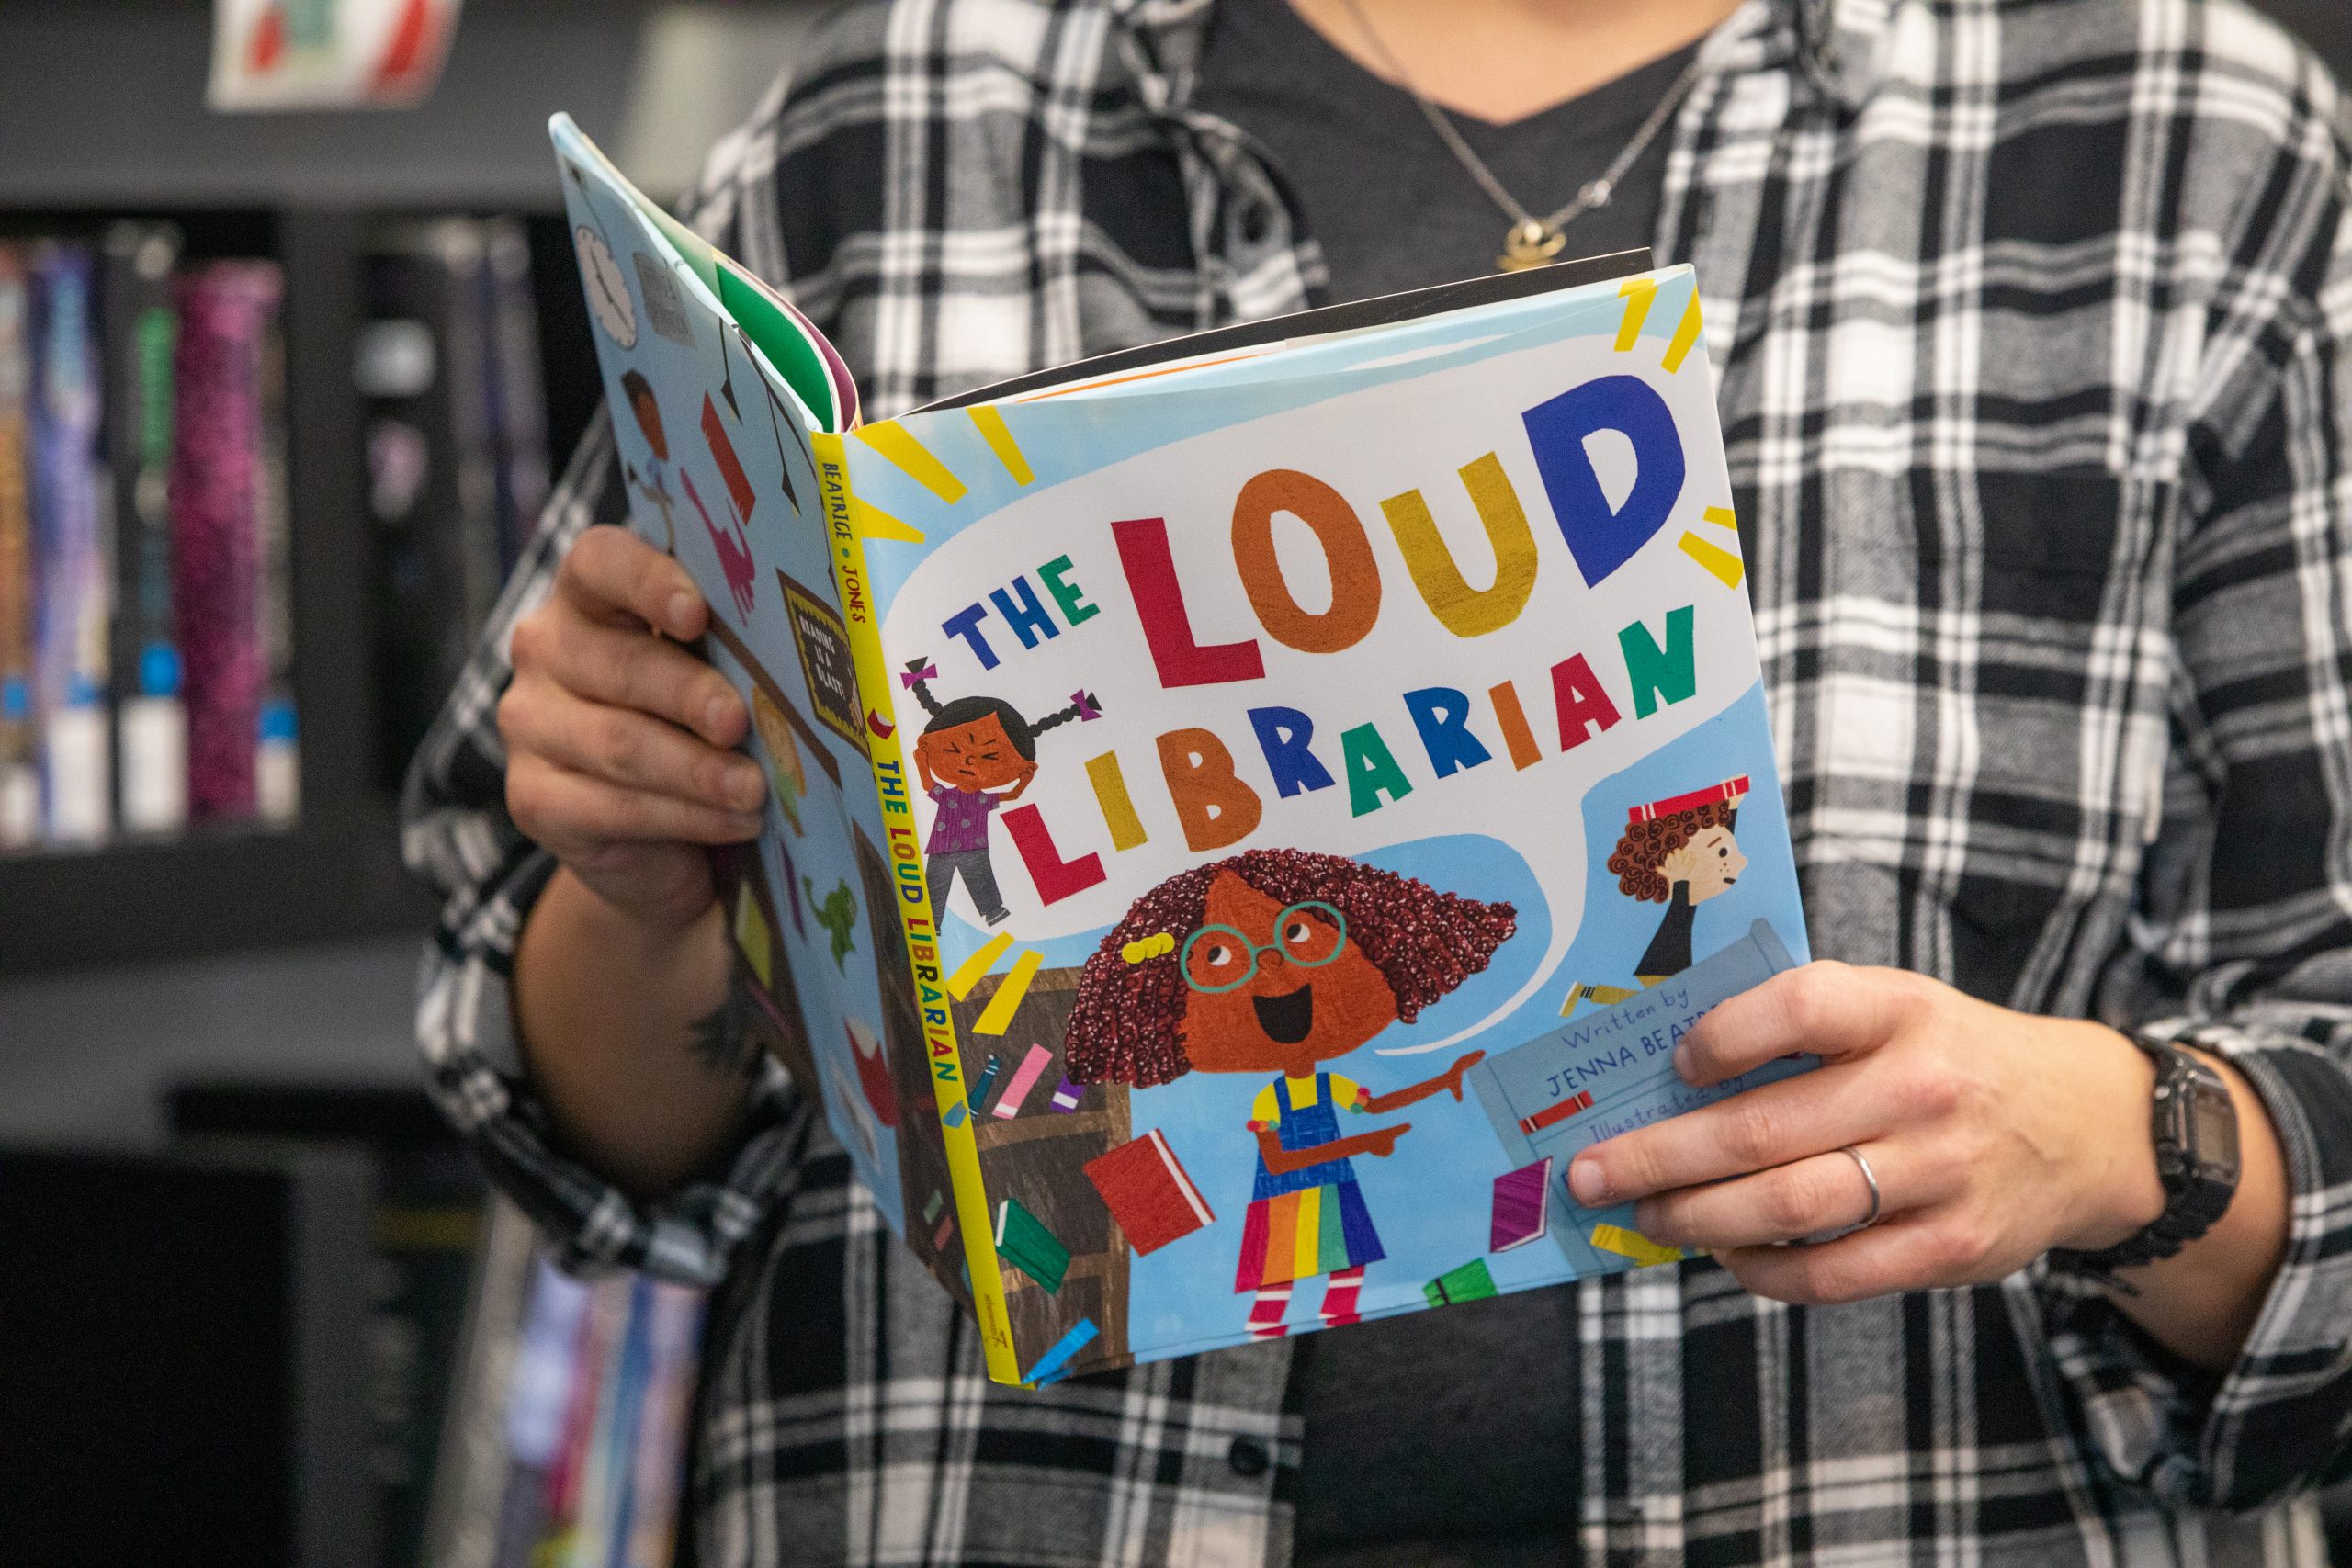 The book, "The Loud Librarian."